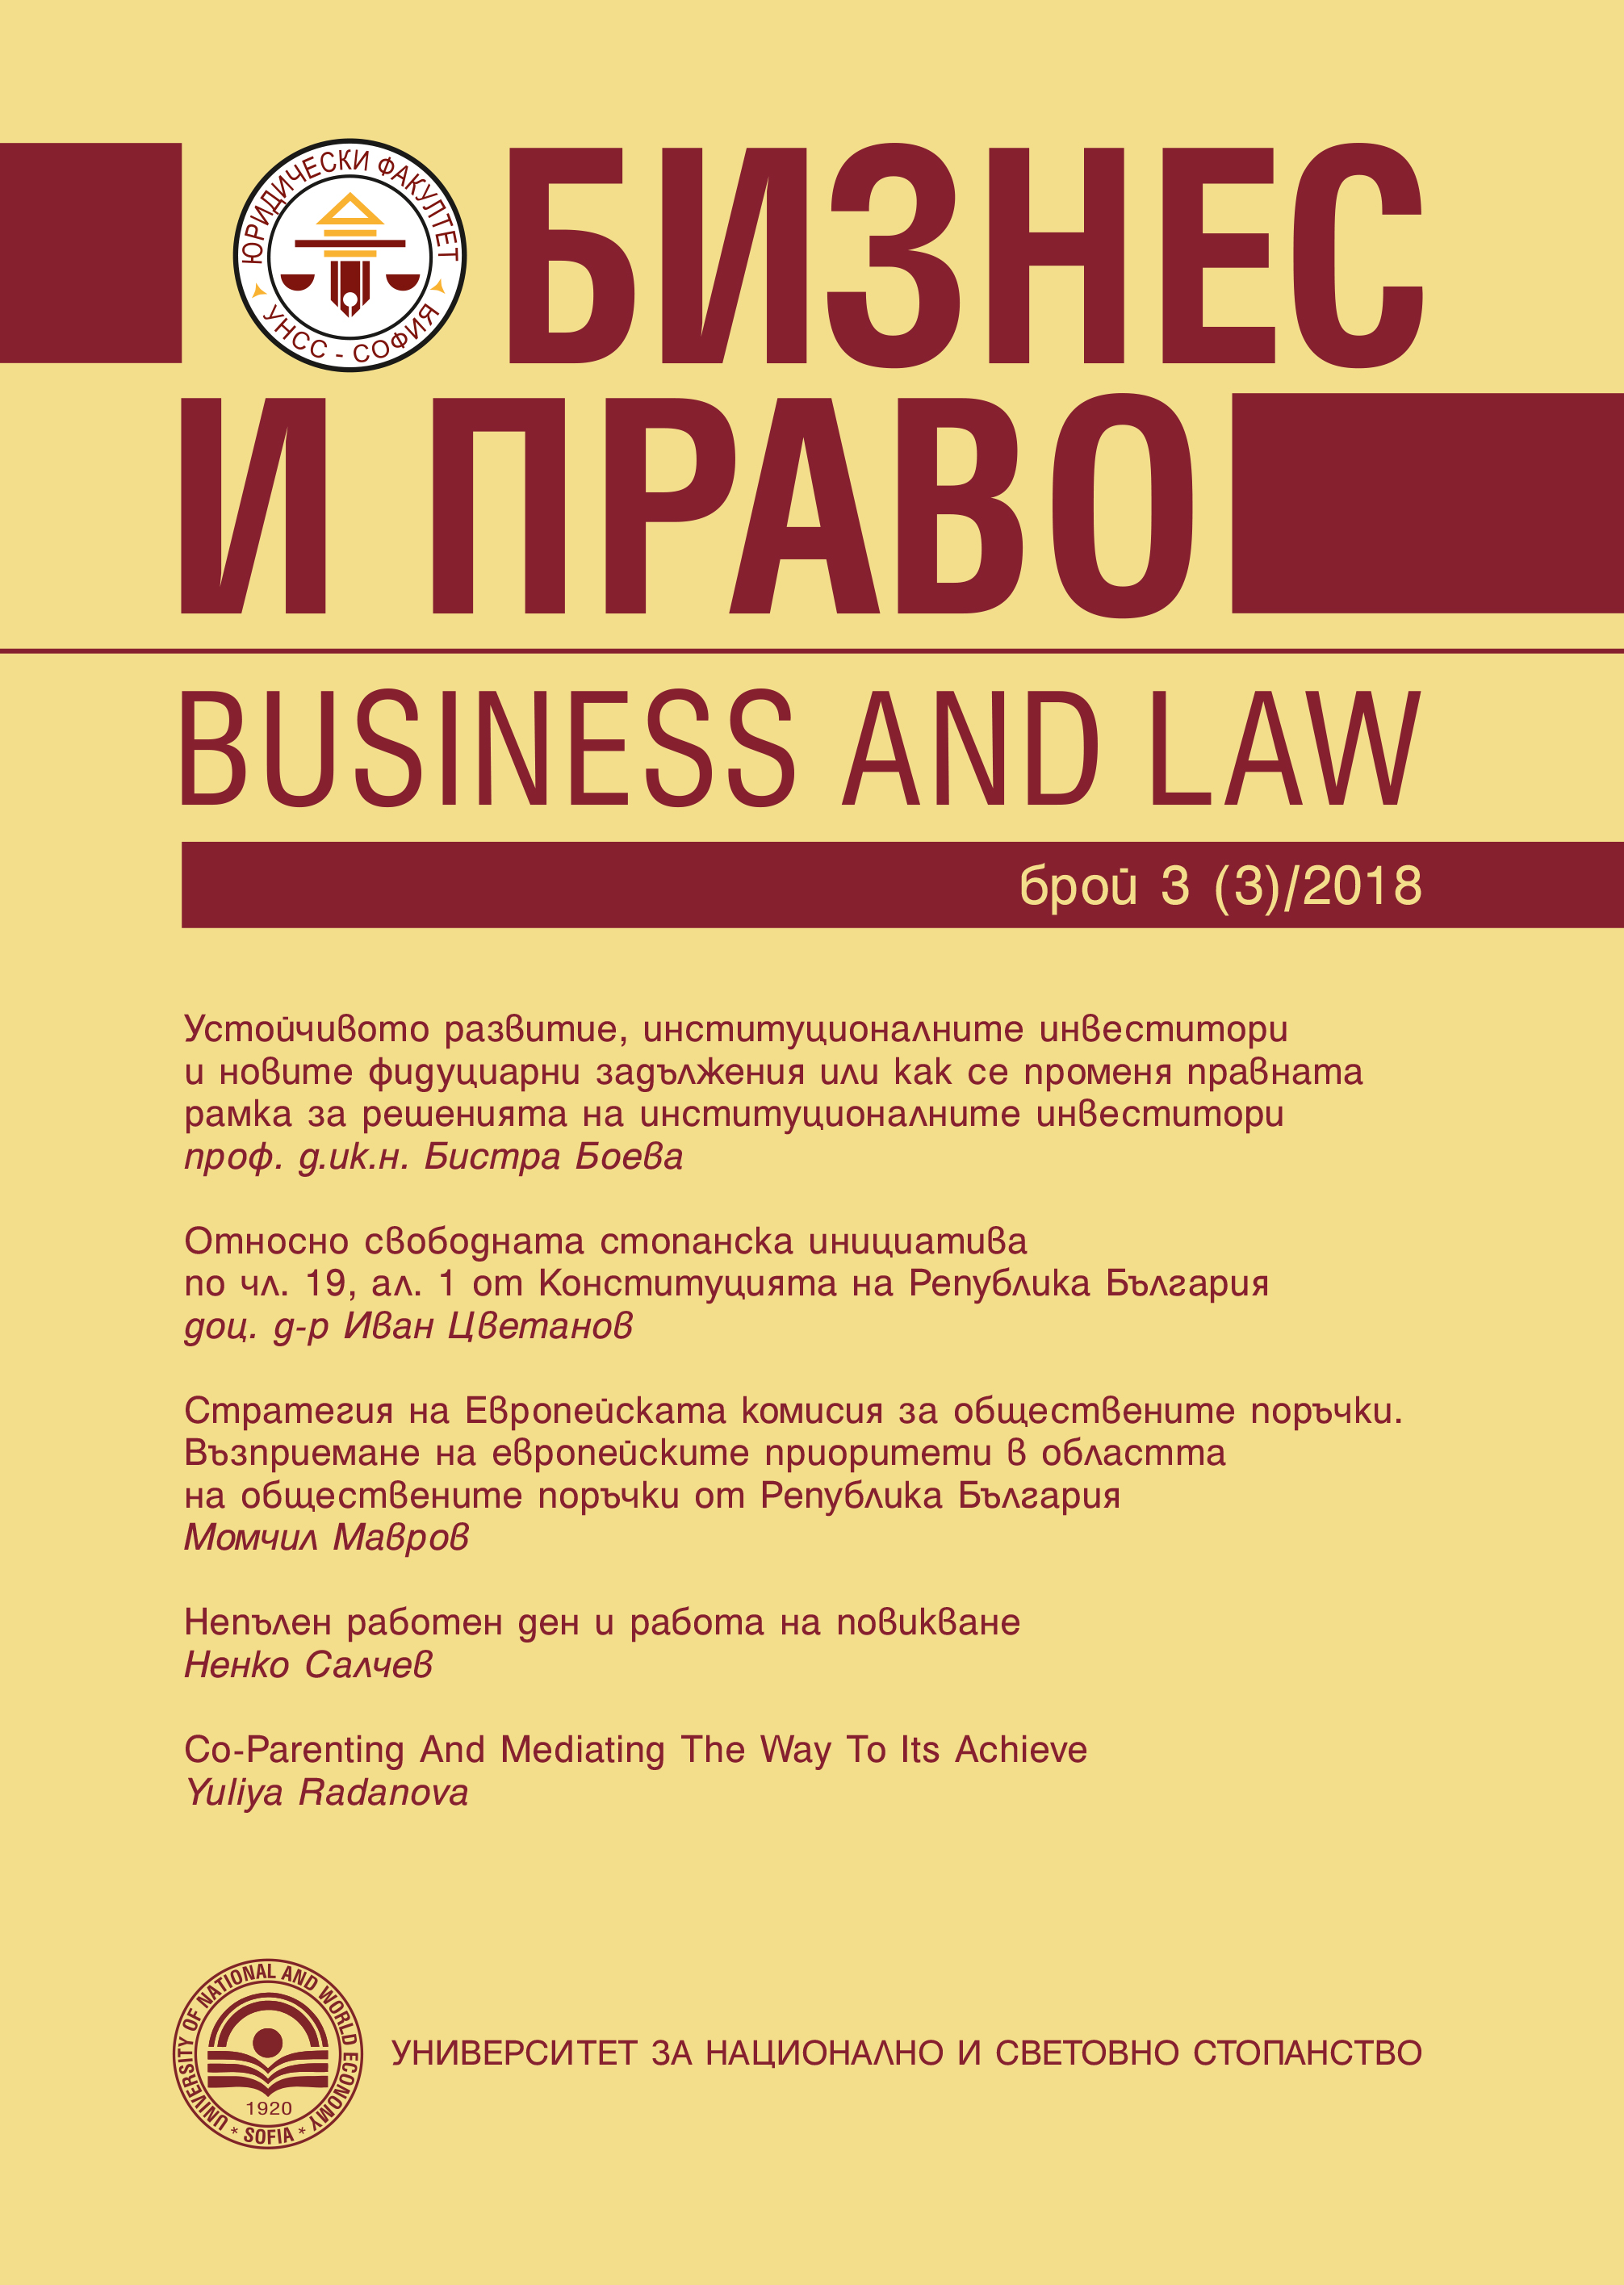 About freedom to conduct a business under article 19, par. 1 of the Constitution of the Republic of Bulgaria Cover Image